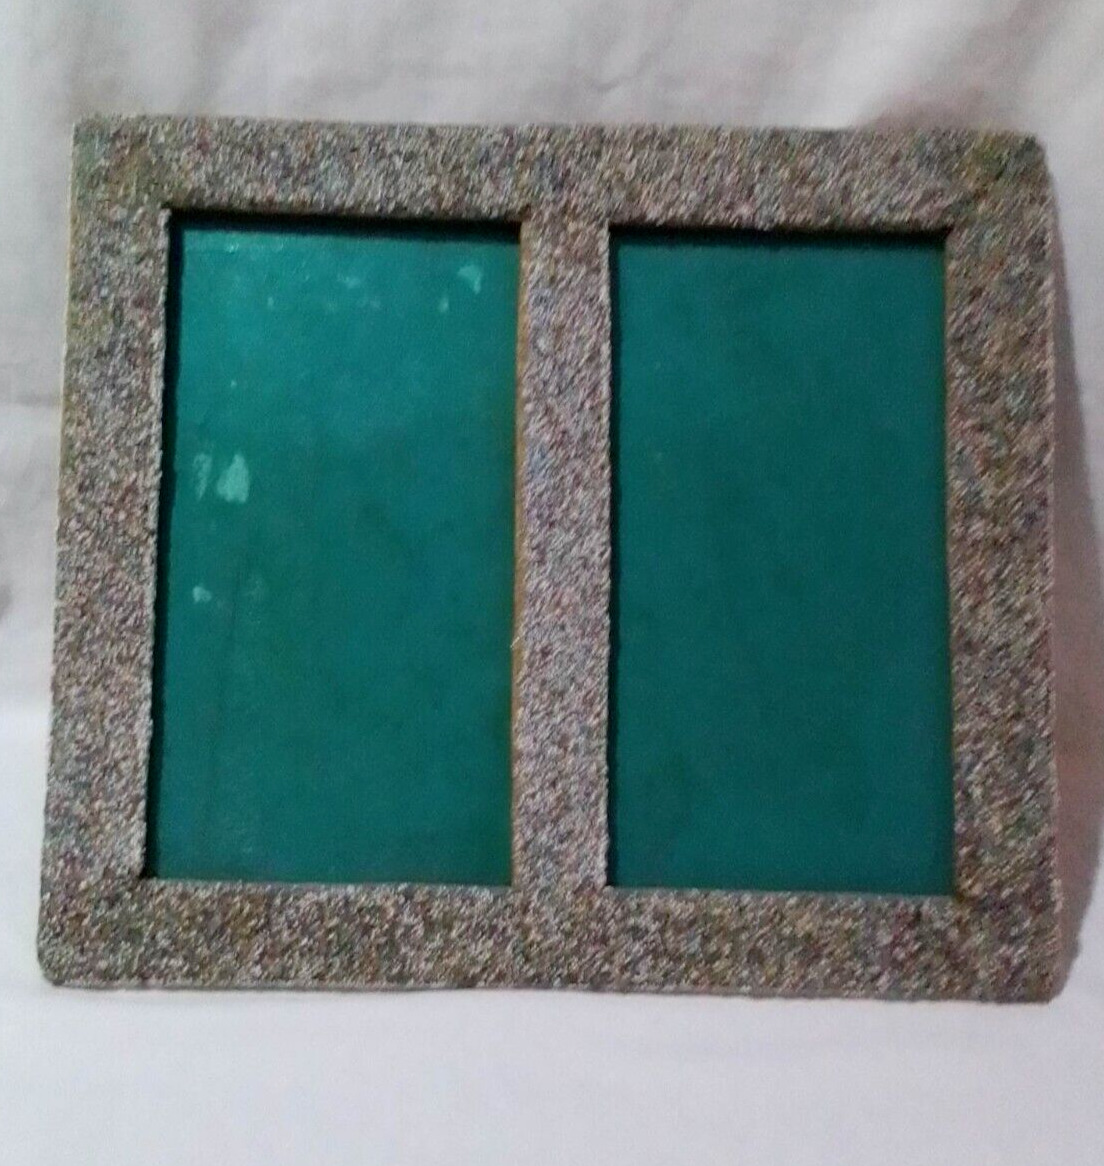 1975 vintage Handmade double photografy picture frame old Colored wood and sand.